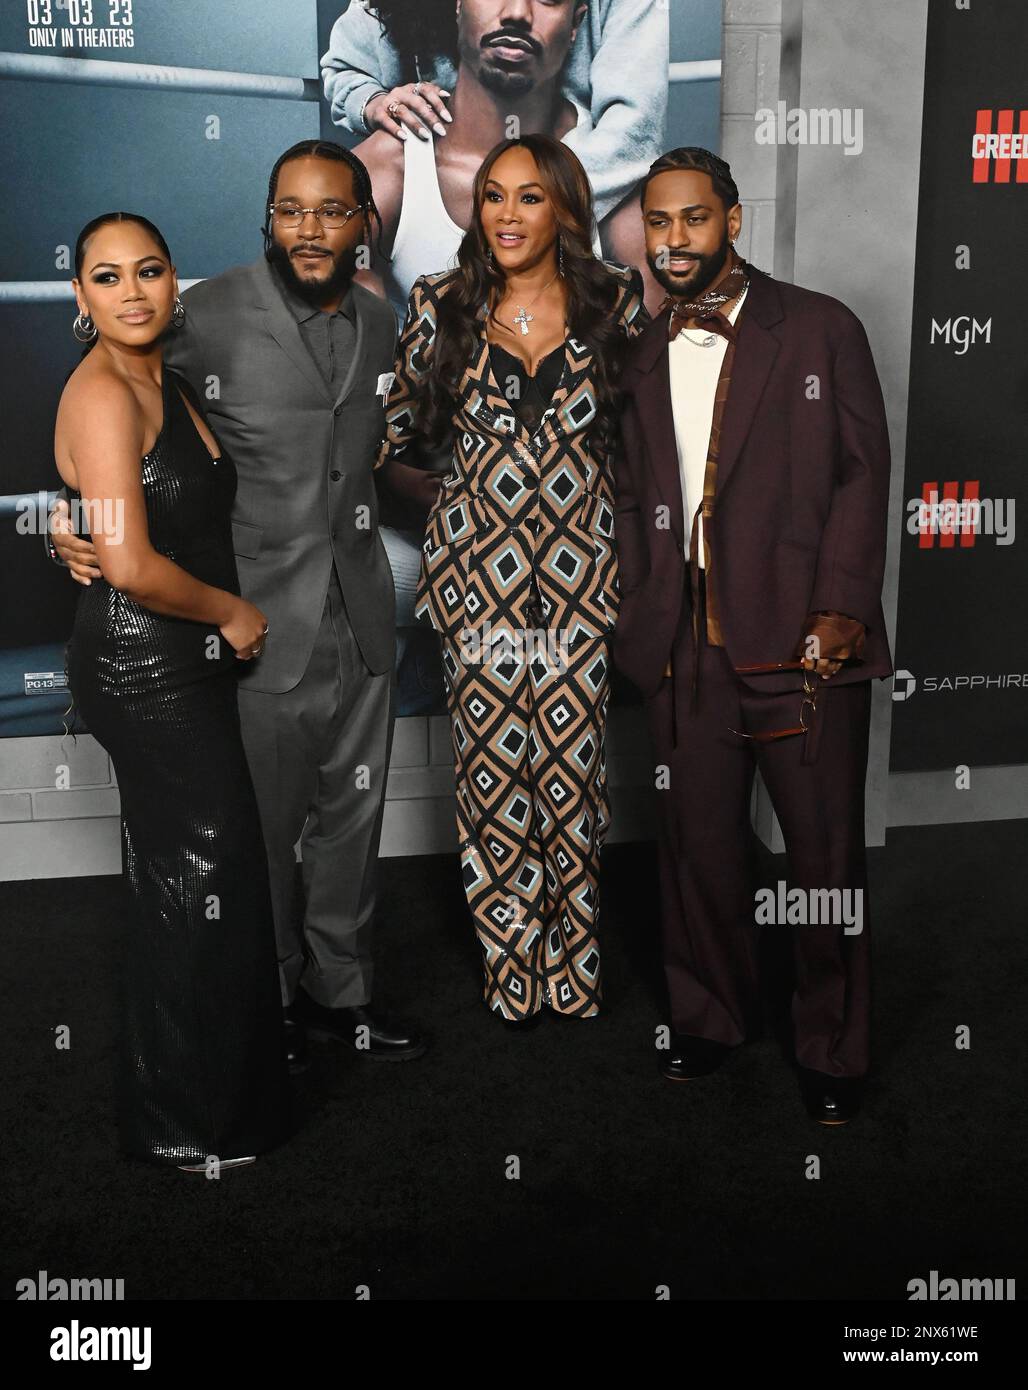 Hollywood, California, USA. 27th Feb, 2023. (L-R) Zinzi Coogler, Ryan Coogler, Vivica A. Fox and Big Sean attend the Los Angeles Premiere of 'CREED III' at TCL Chinese Theatre on February 27, 2023 in Hollywood, California. Credit: Jeffrey Mayer/Jtm Photos/Media Punch/Alamy Live News Stock Photo